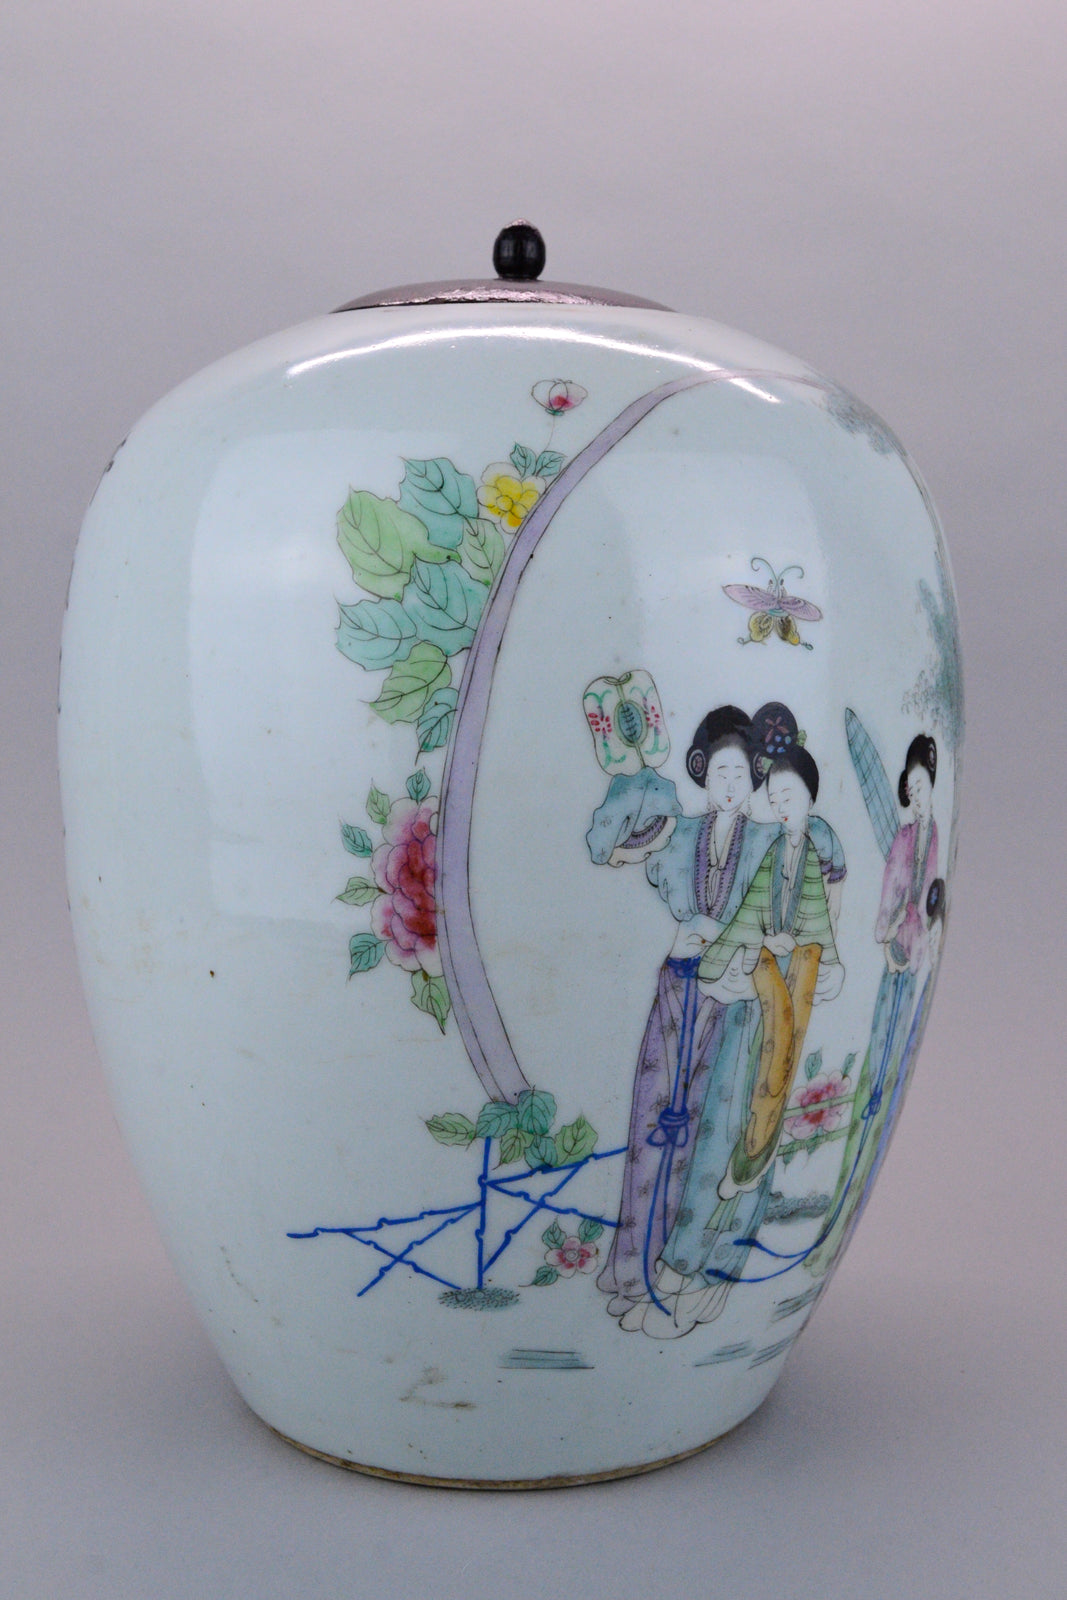 Chinese Ginger Jar Garden Scene with Calligraphy